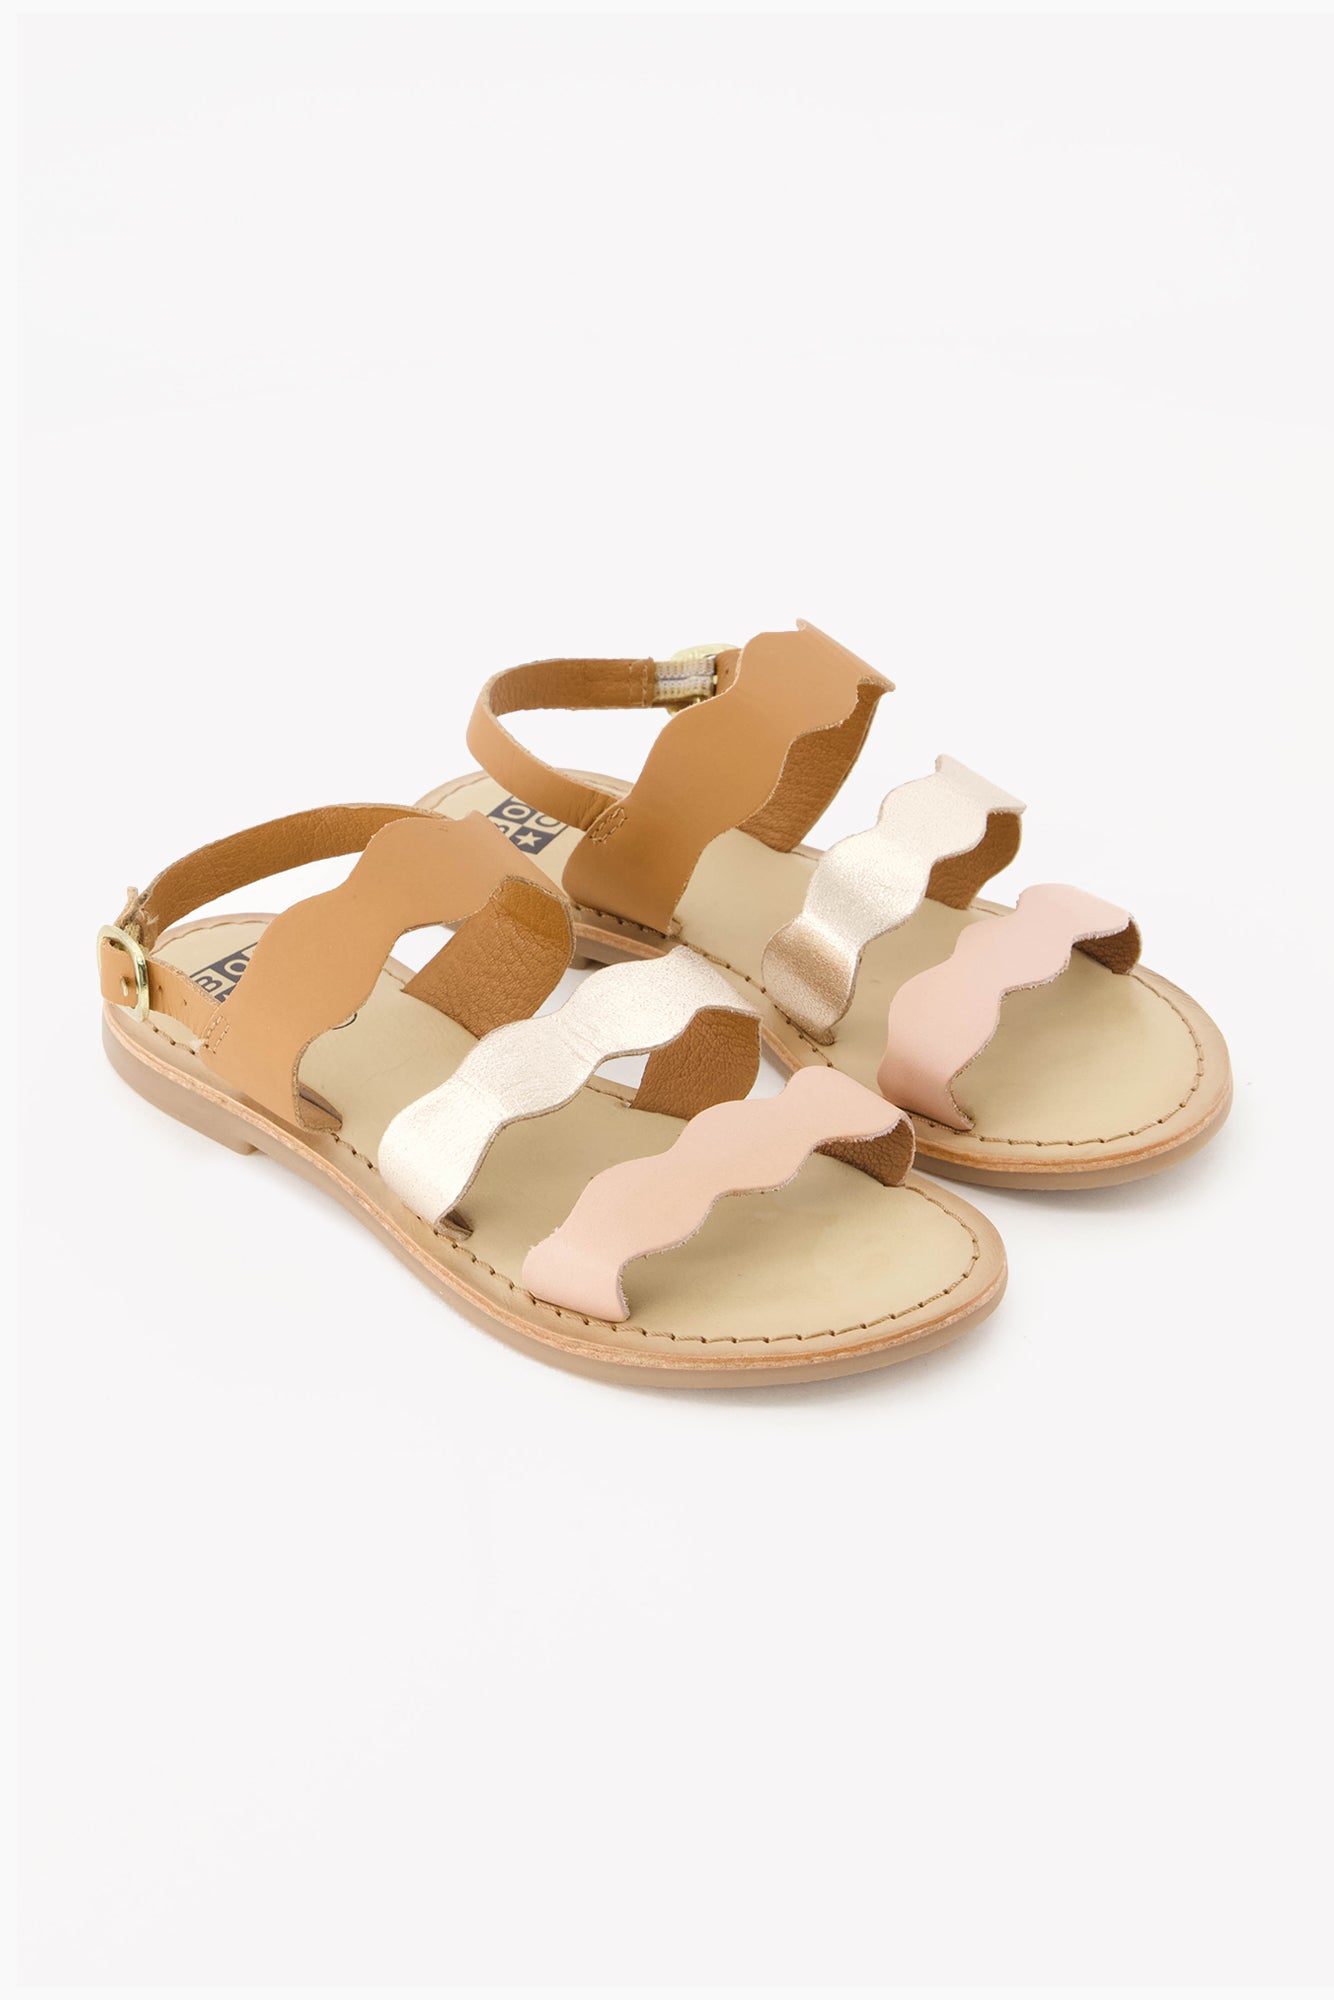 Sandals - Samia Pink leather